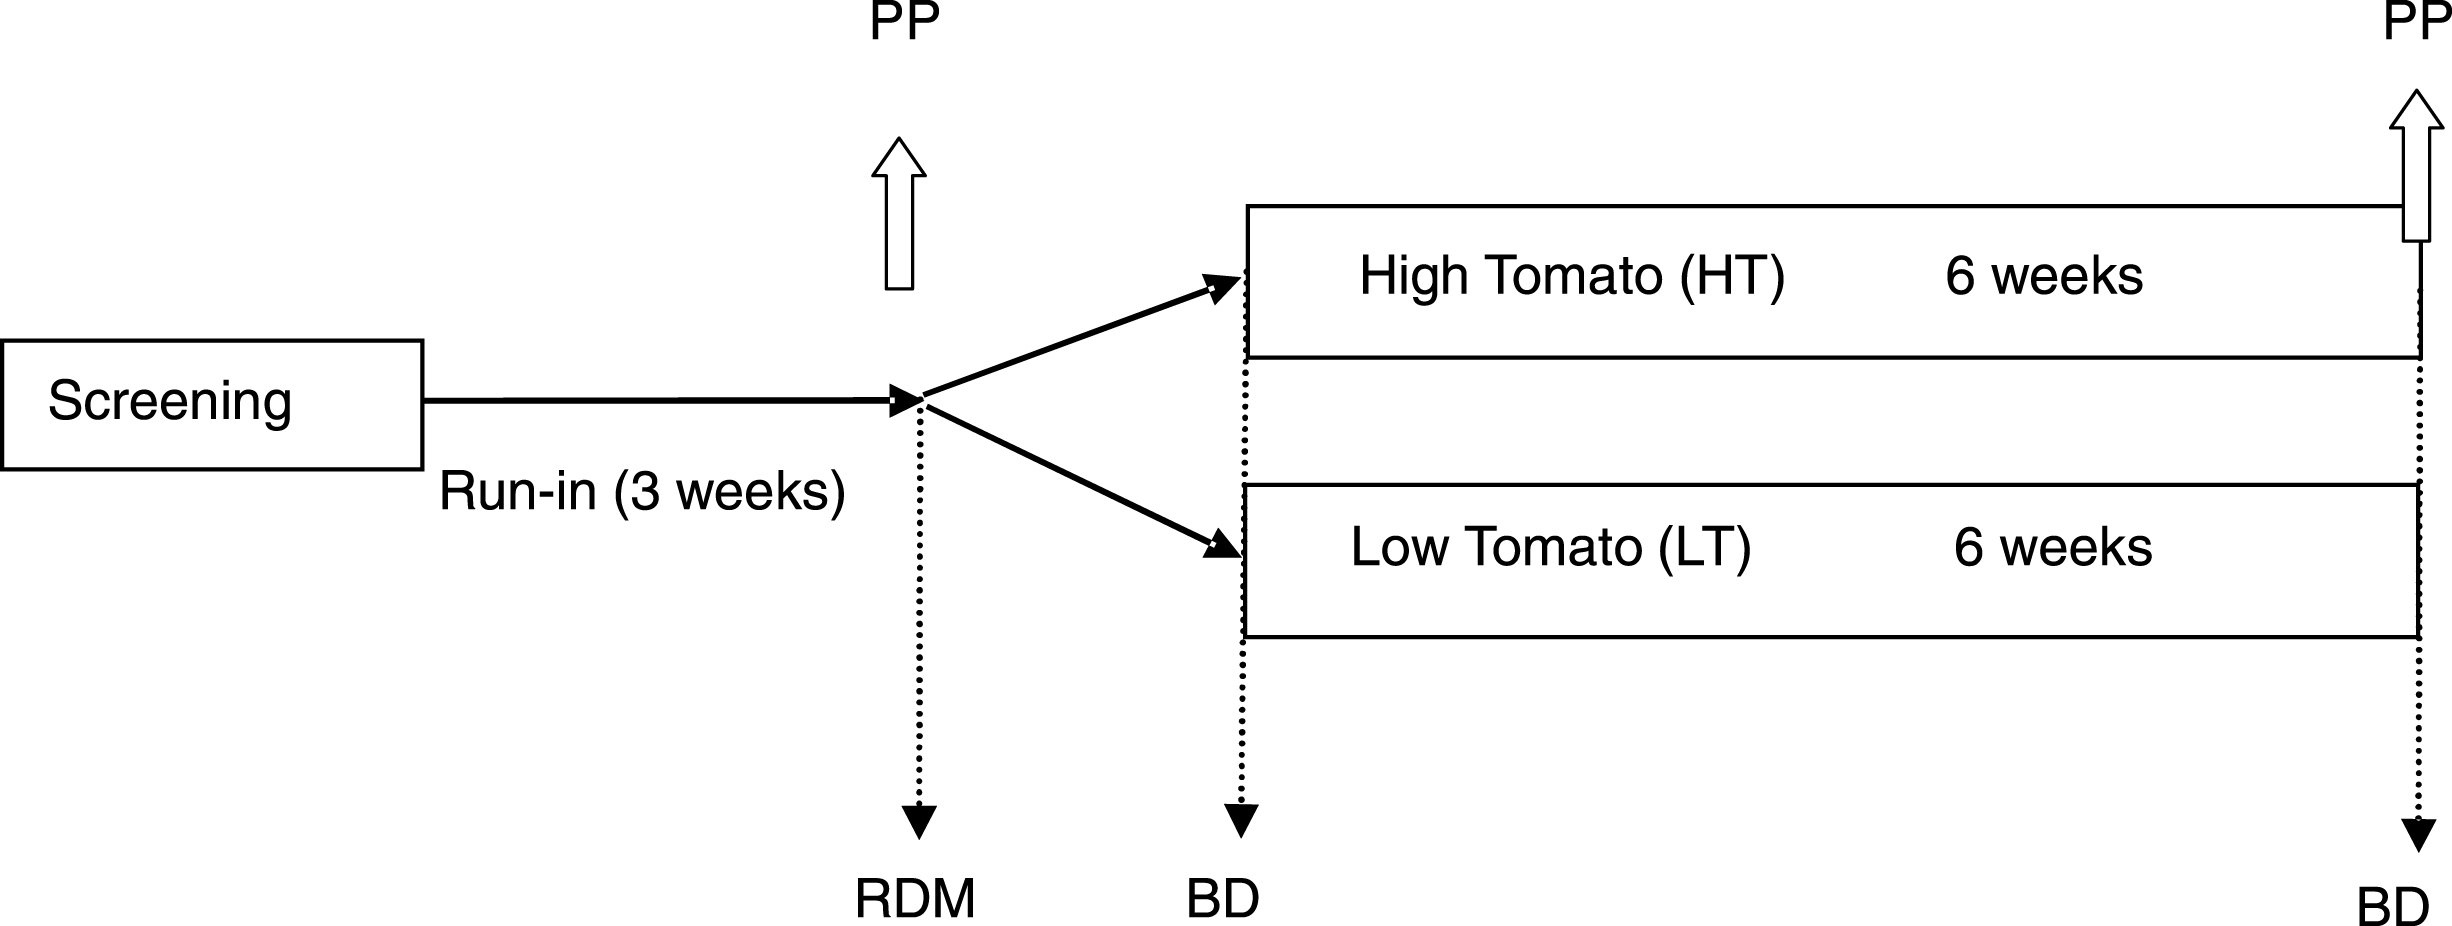 Study Schema –3 week Run-in followed by 6 weeks high tomato (HT) or low tomato (LT) diet. Fasting blood samples collected before and after chronic intervention (BD, fasting blood draw). A postprandial study (PP) of the response to a high fat meal over 6 h was conducted before and after respective HT or LT interventions. PP sampling times were 0 (fasting), 30, 60, 90, 120, 180, 240, 300, 360 min. RDM, Randomization.